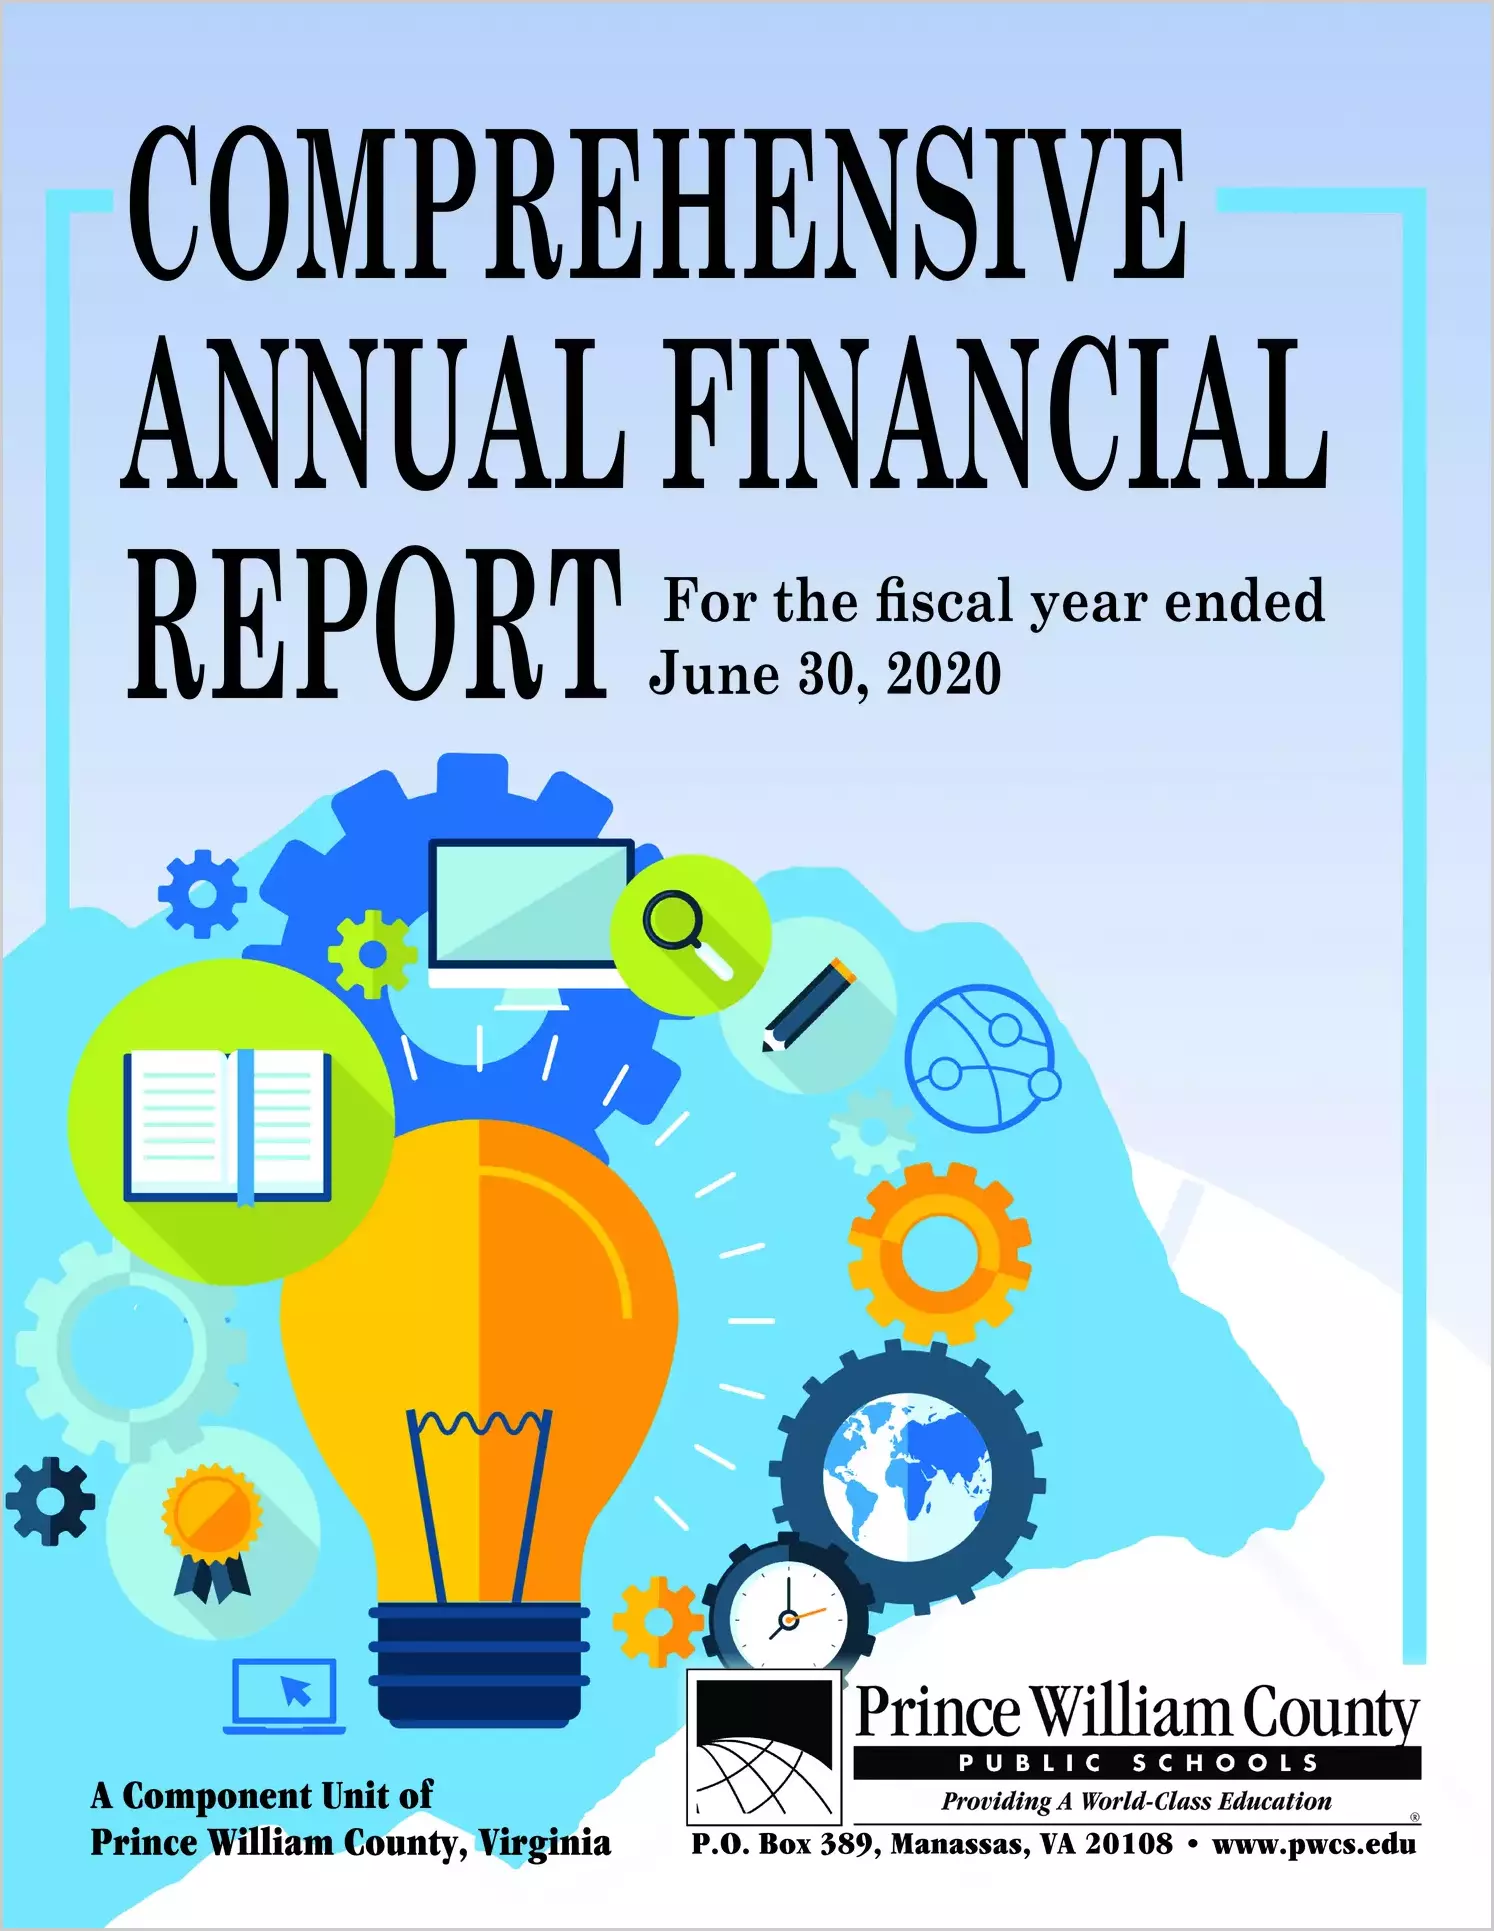 2020 Public Schools Annual Financial Report for County of Prince William